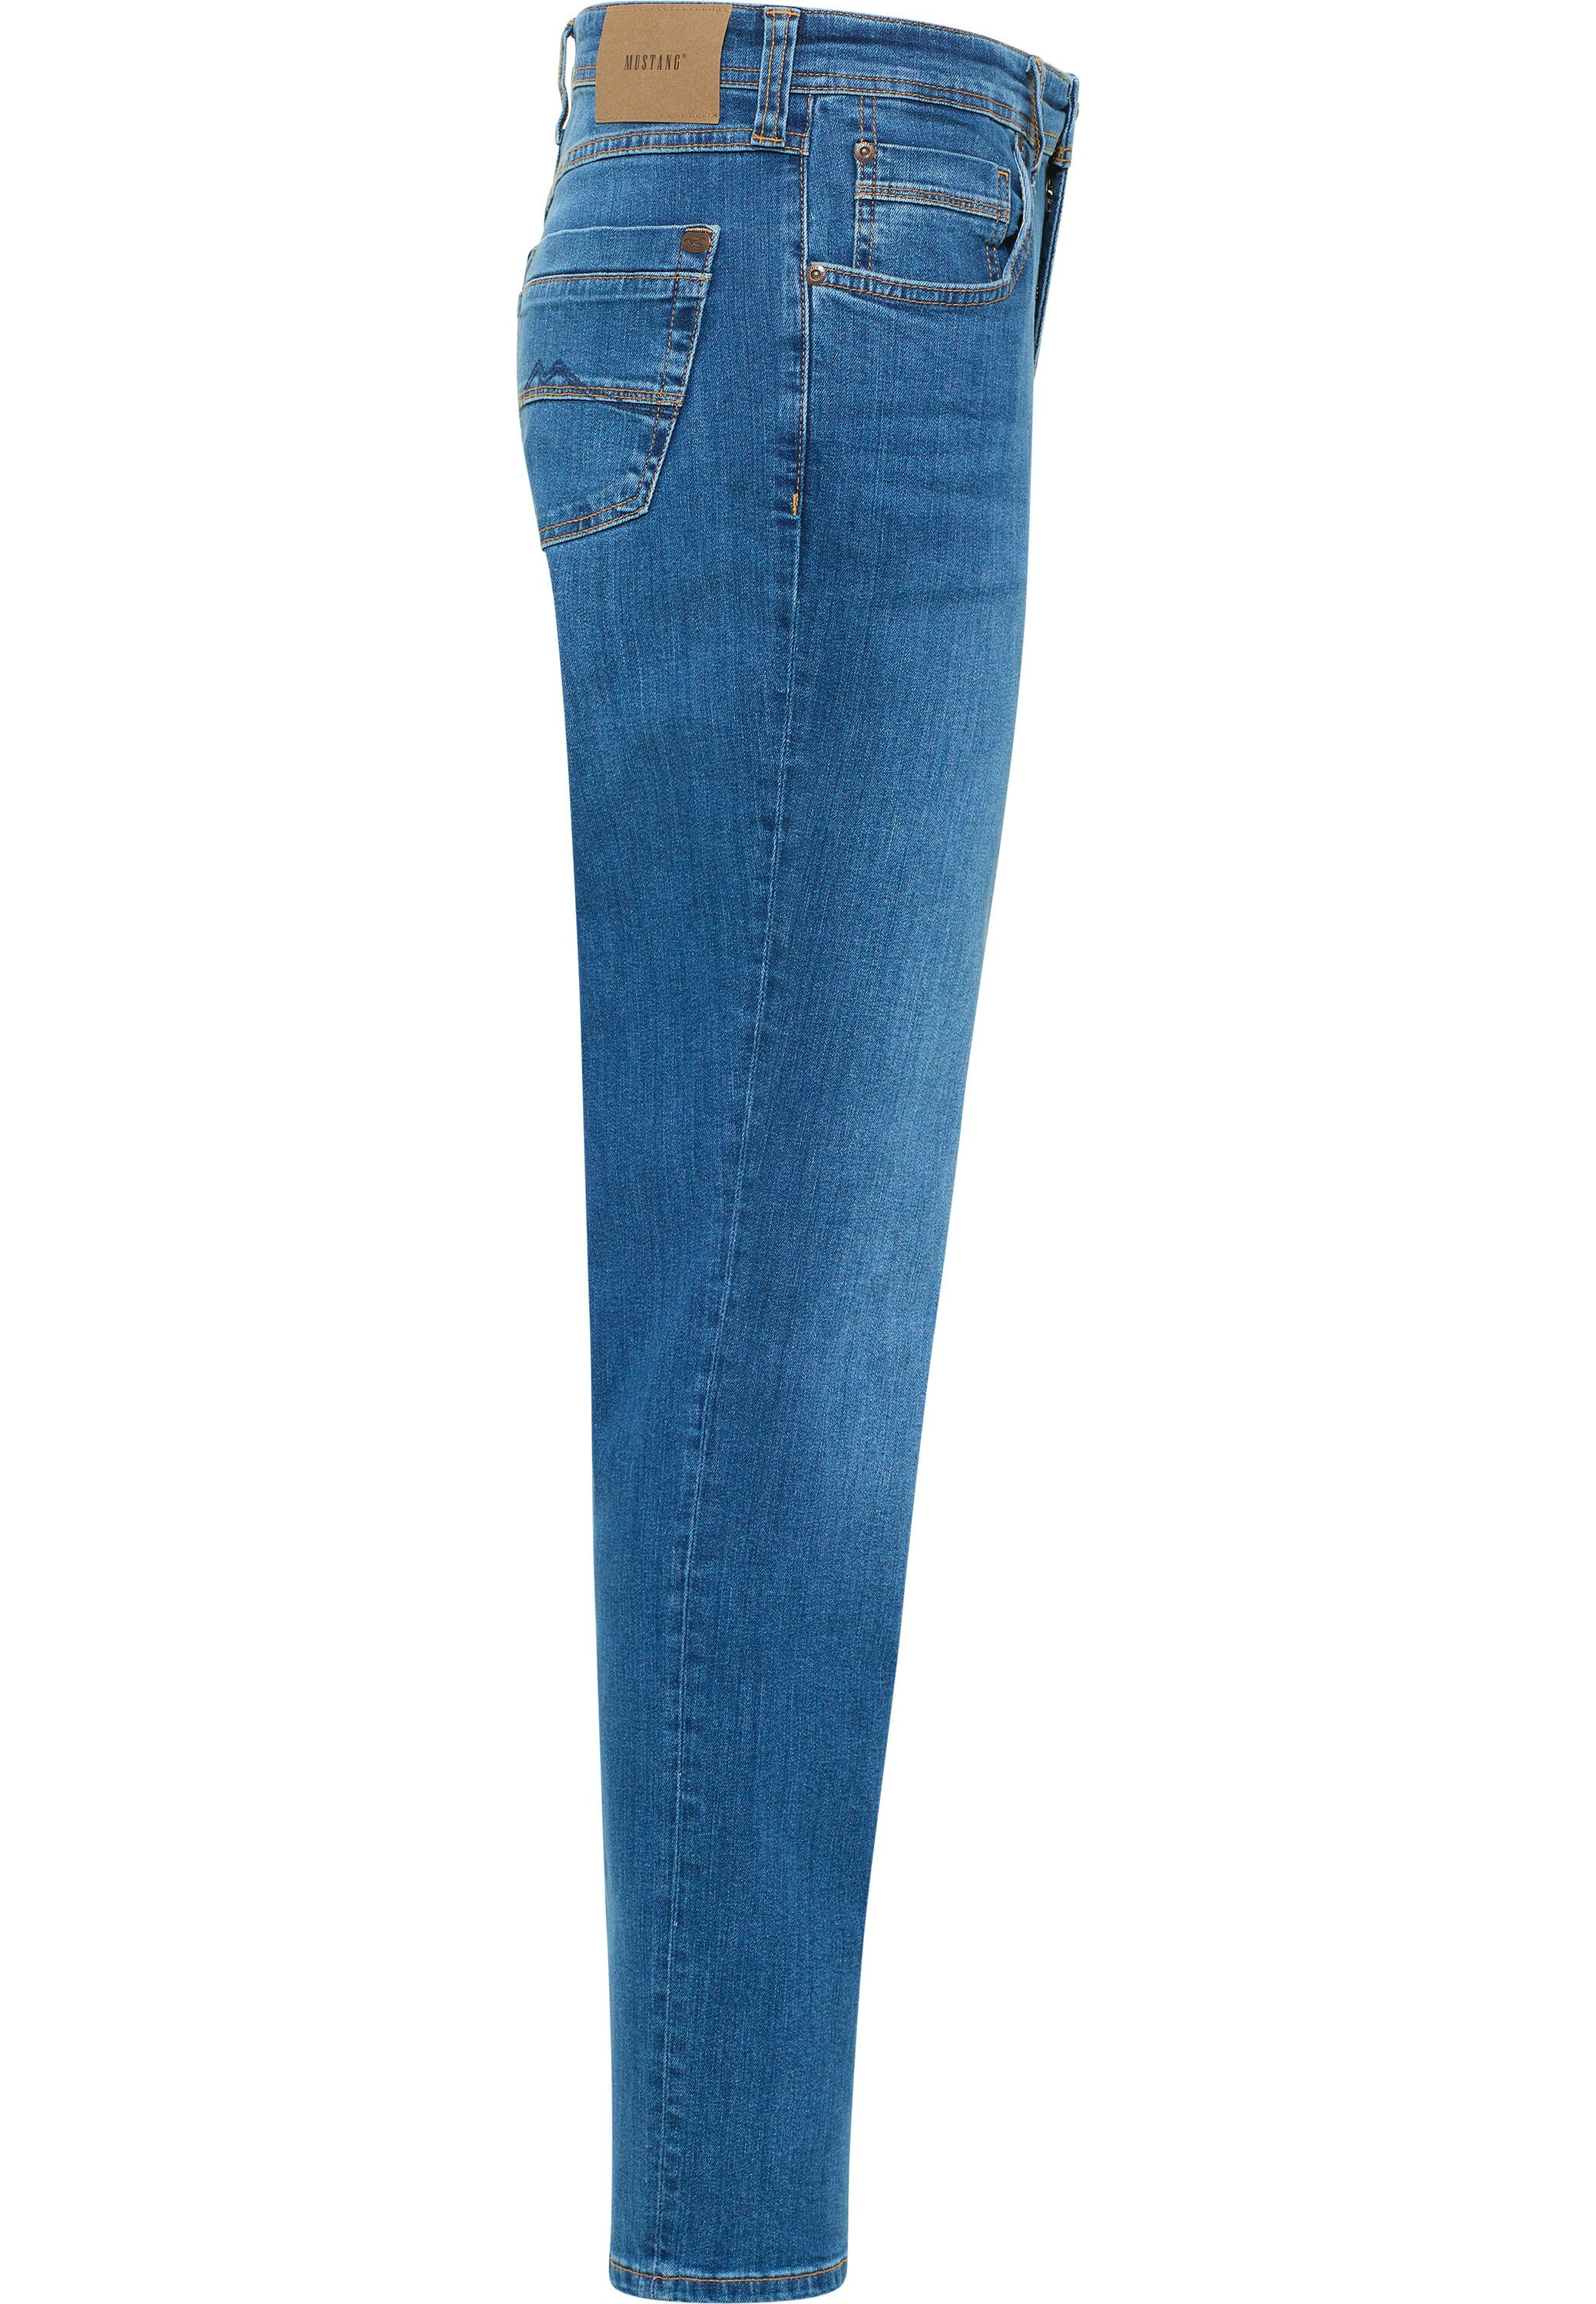 Mustang Washington Jeans Regular Fit cleanblue extra lang